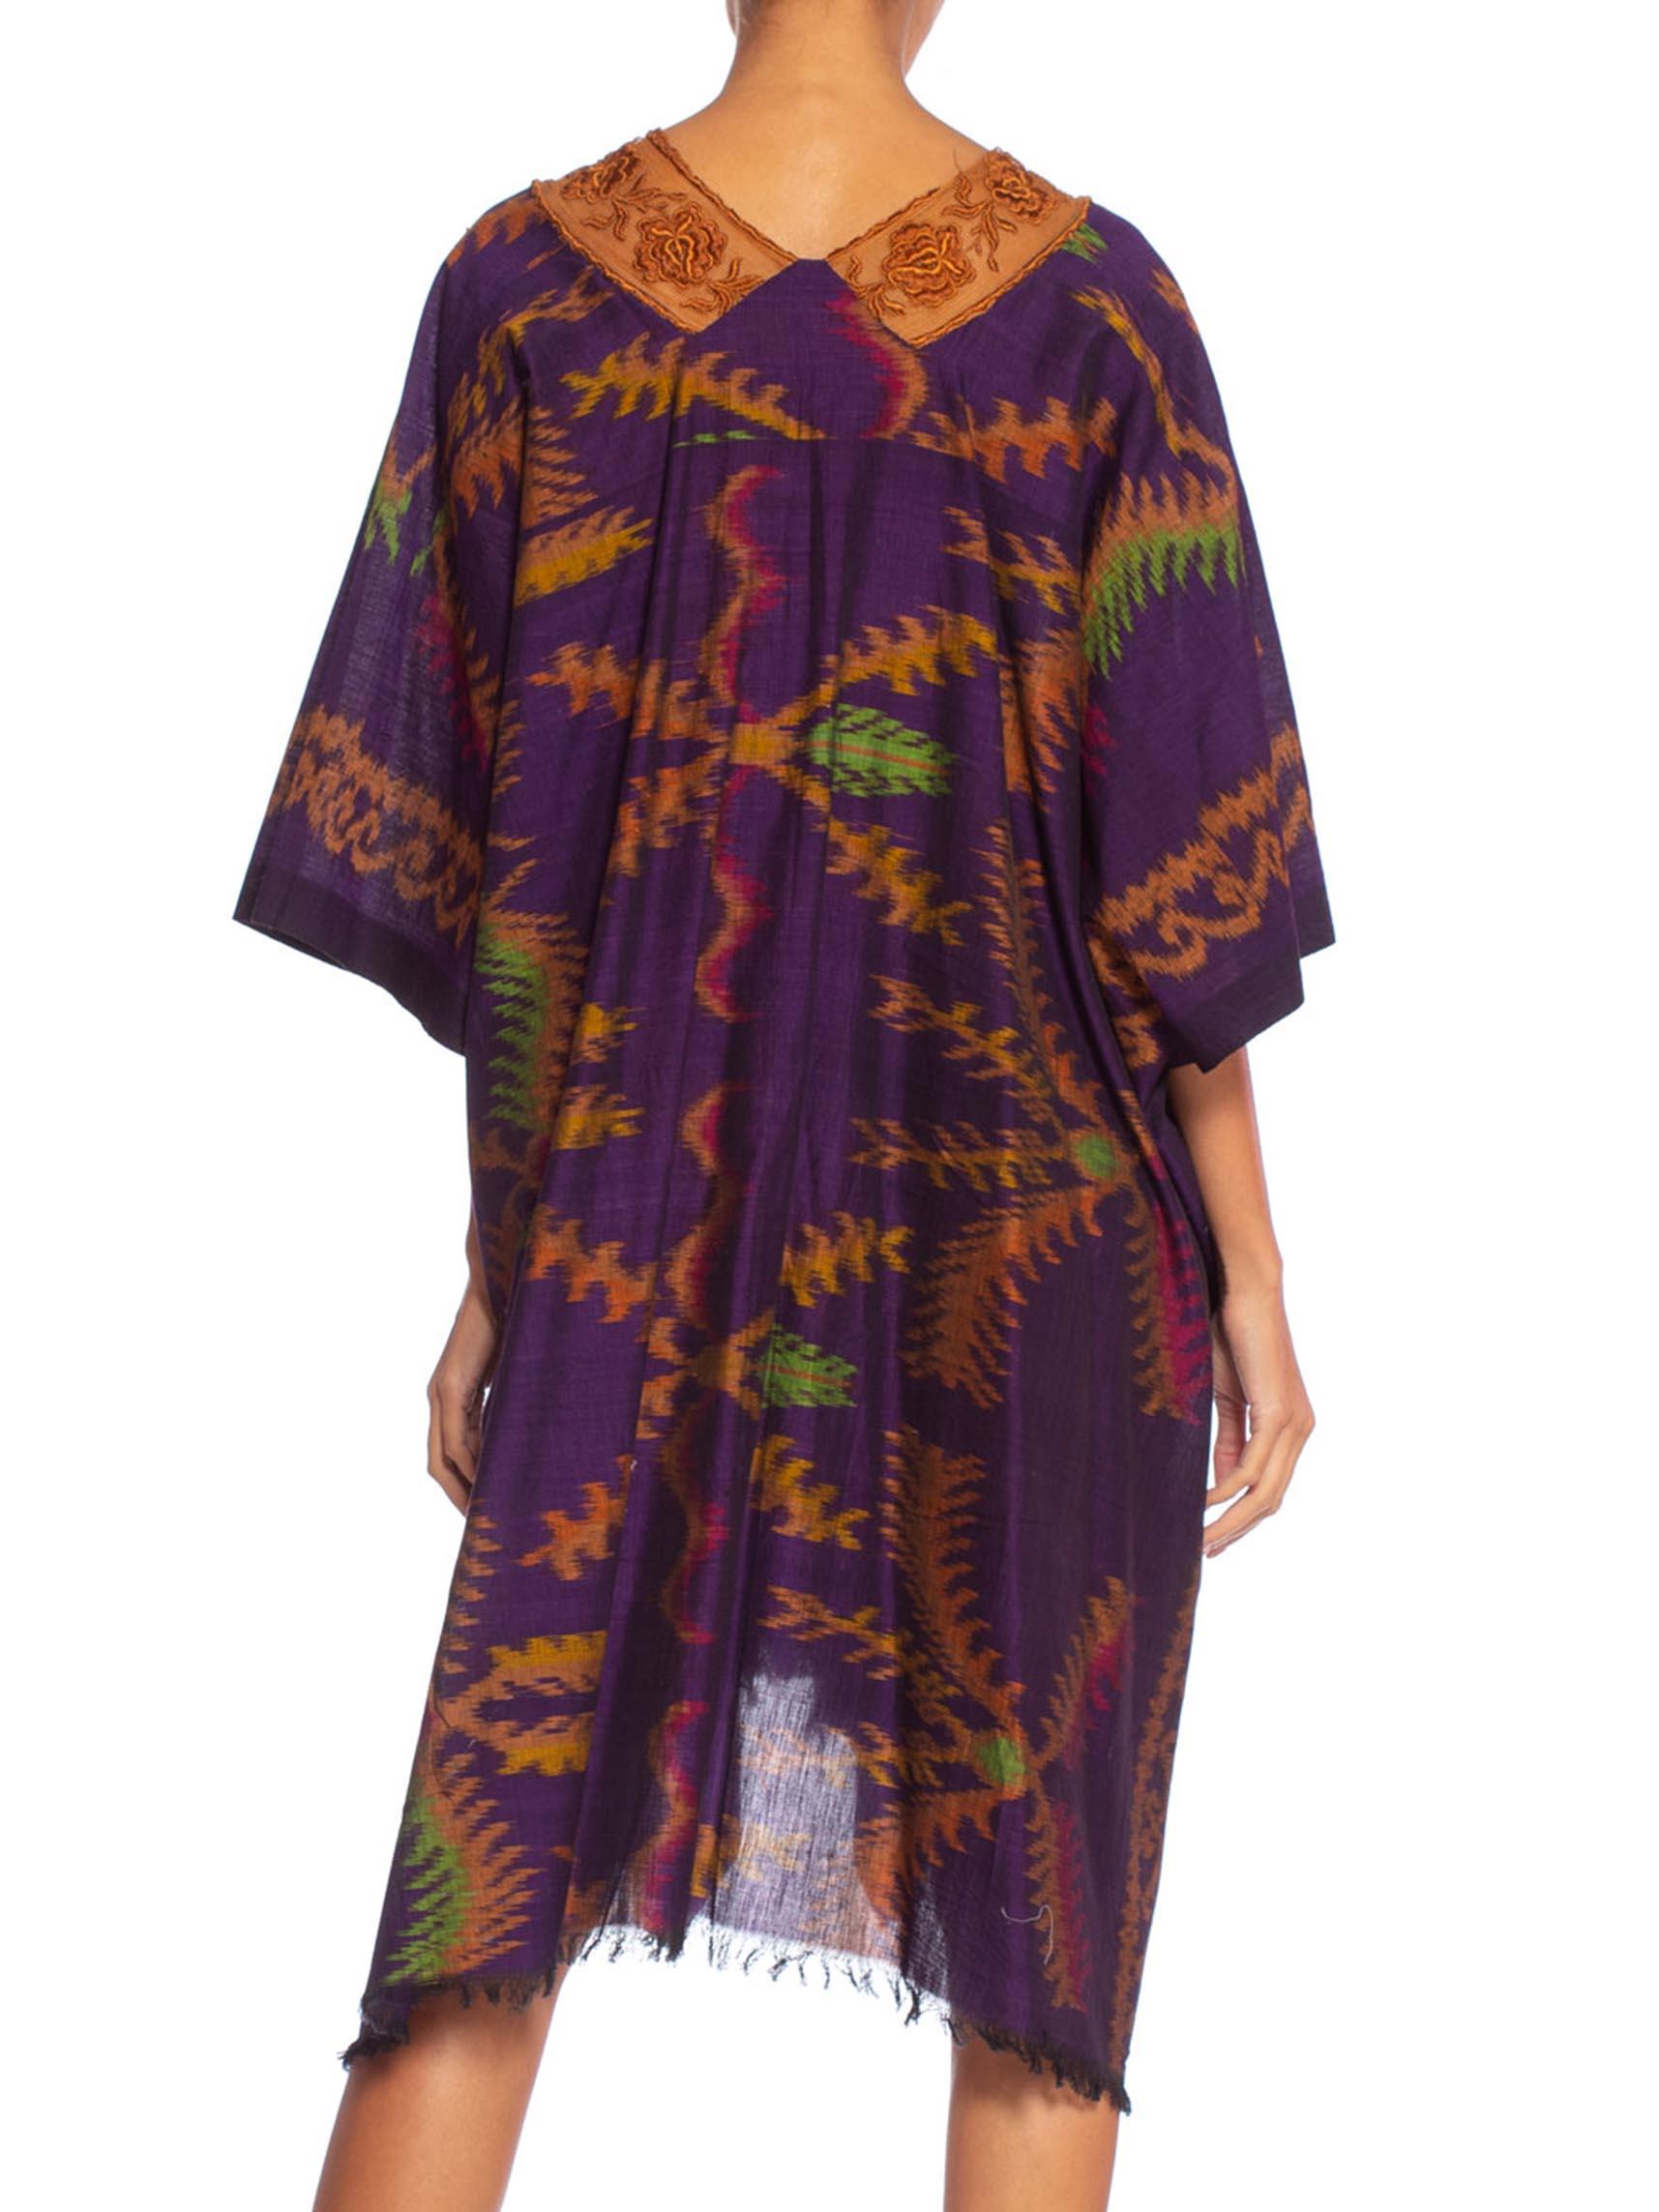 MORPHEW COLLECTION Purple & Brown Silk Ikat Kaftan Handmade With Victorian Lace For Sale 2